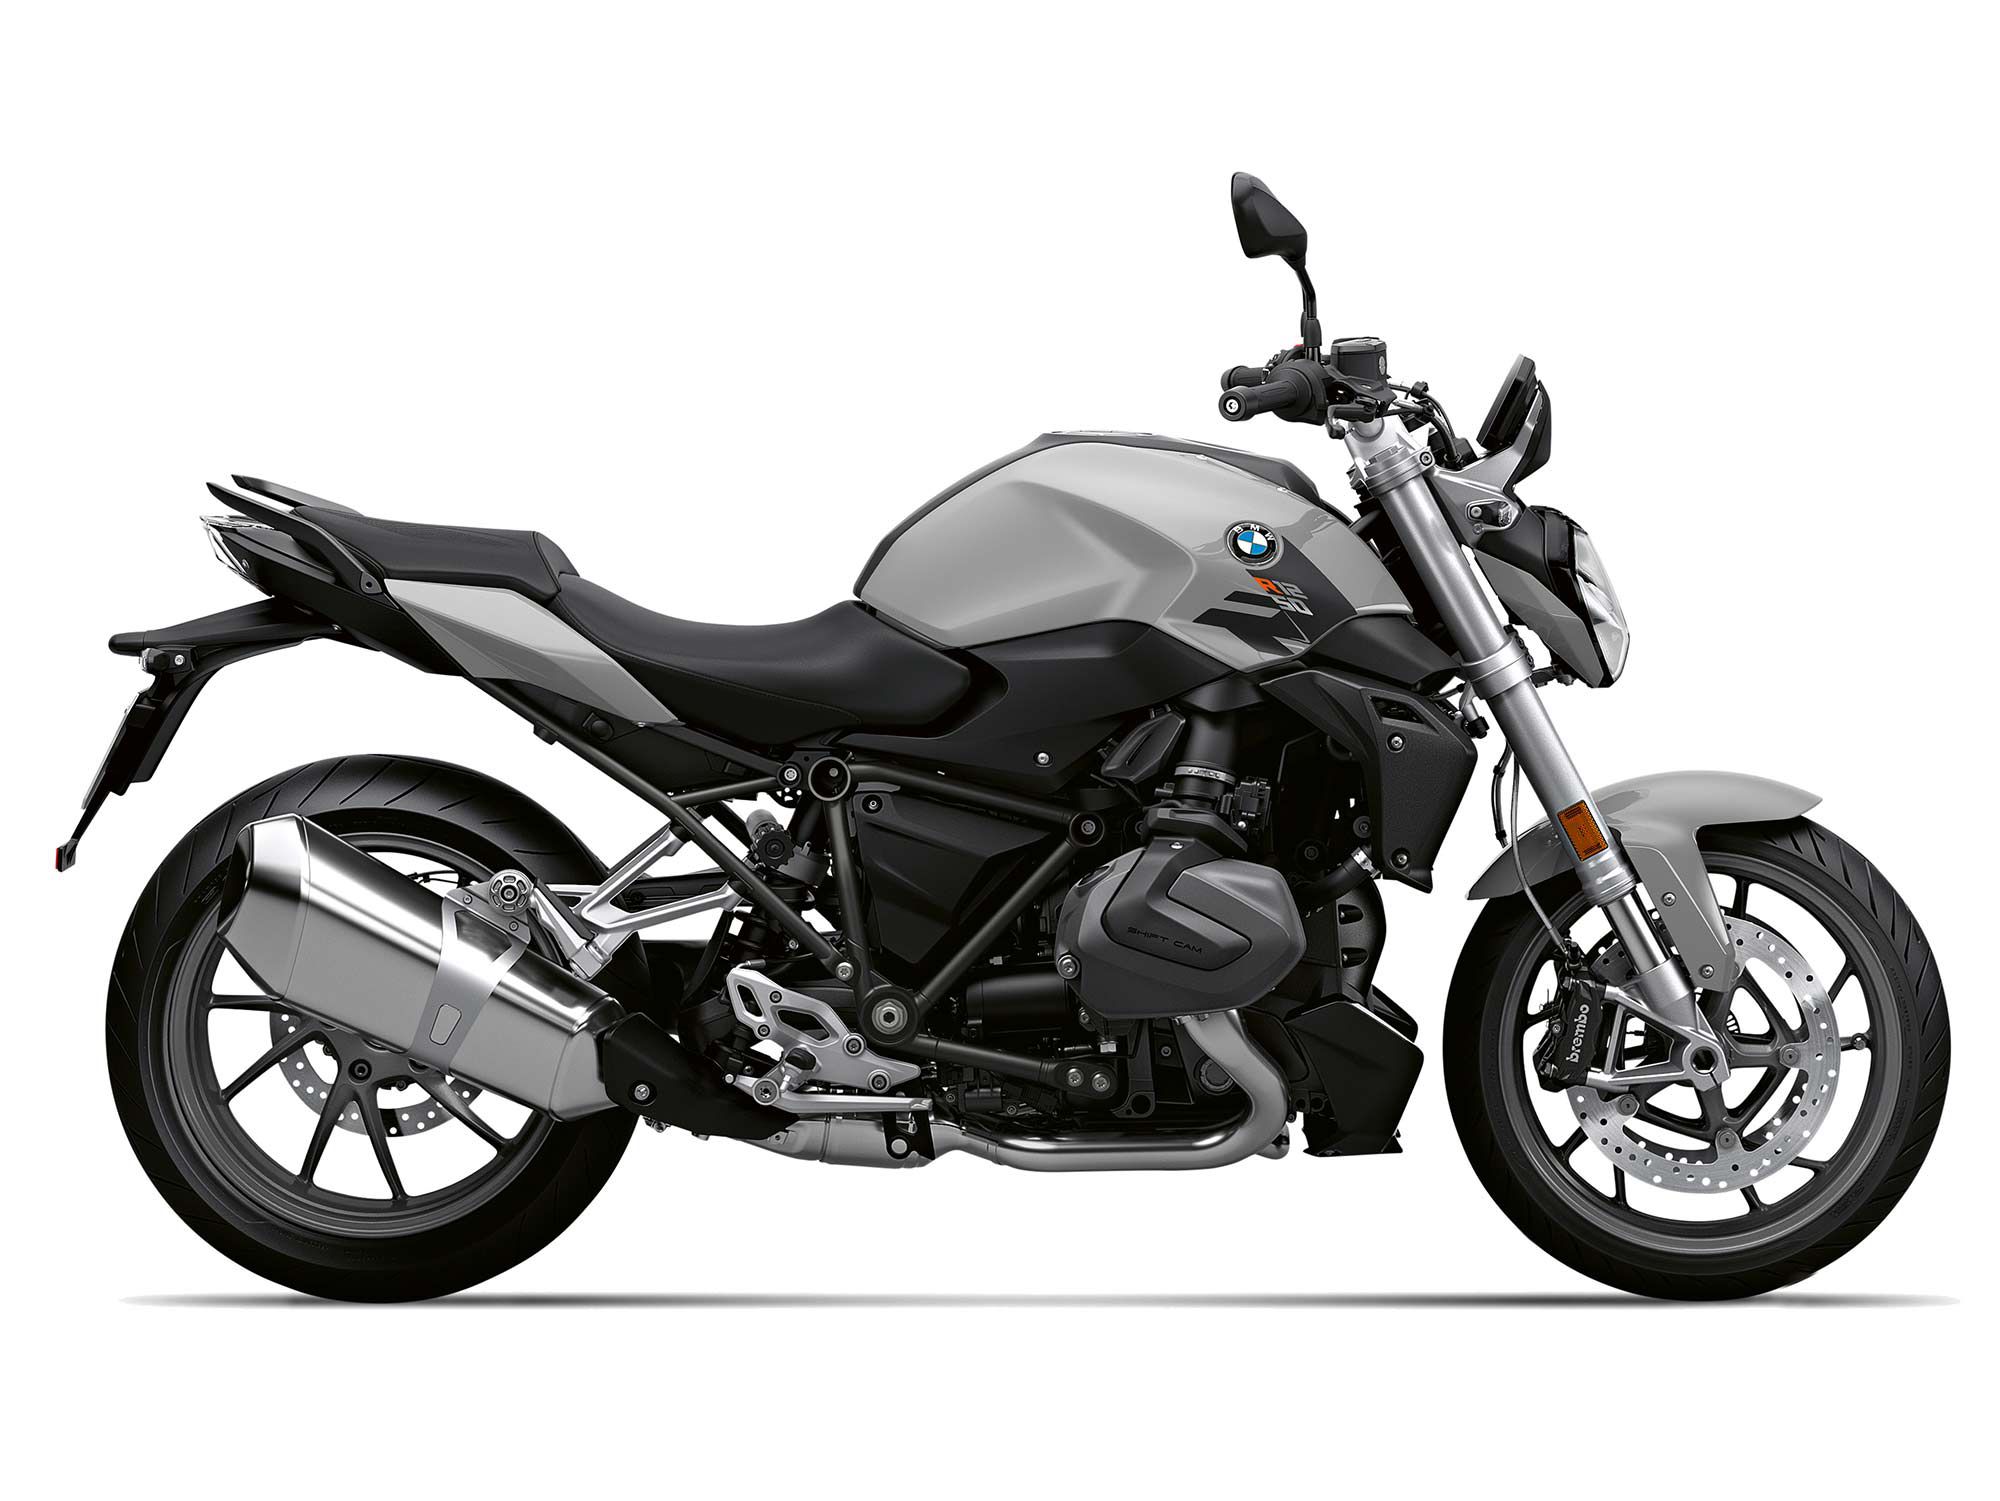 The 2023 BMW R 1250 R will be priced at $14,995.